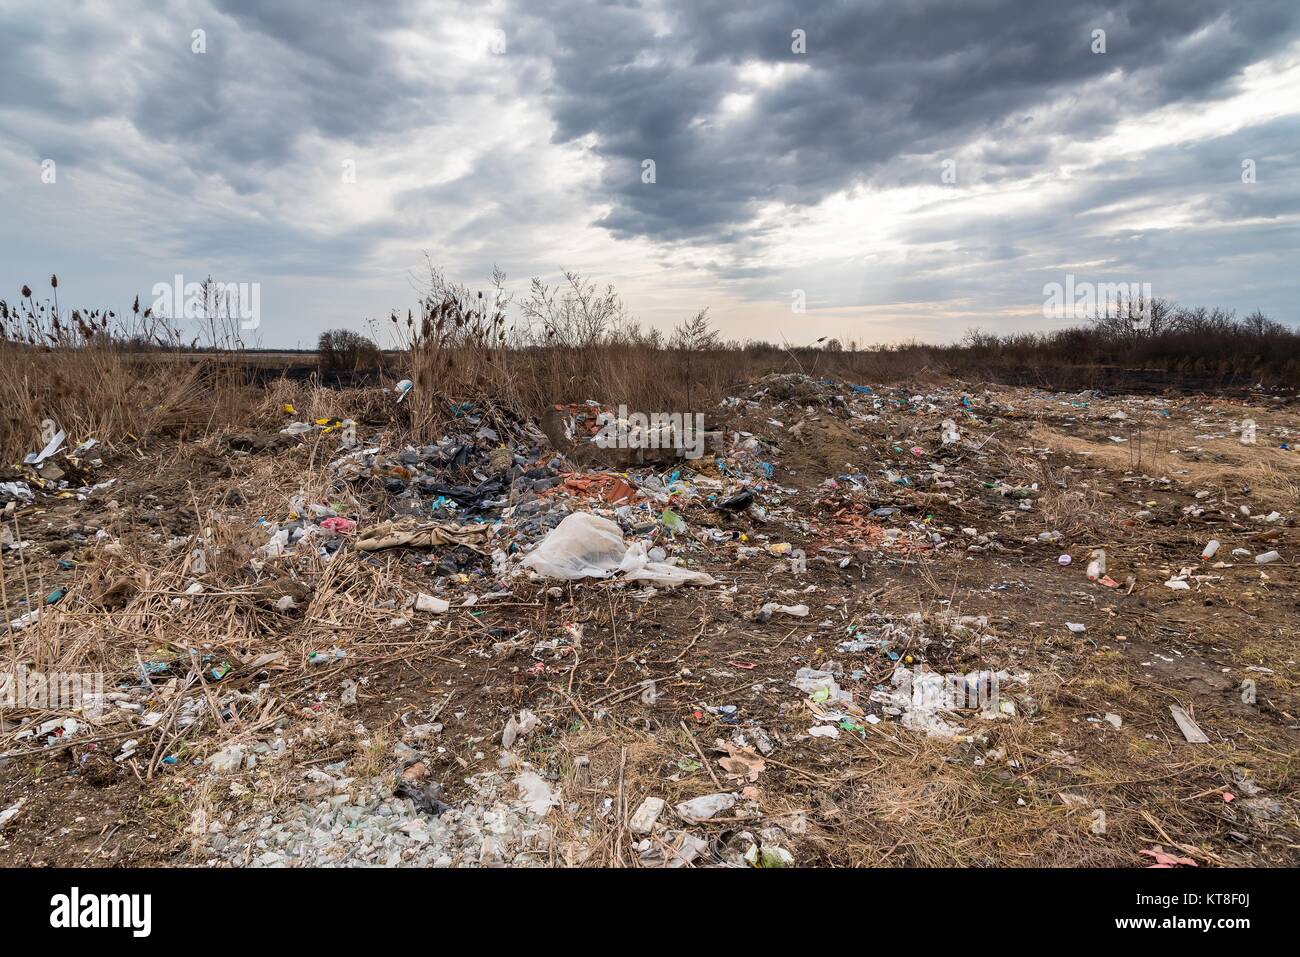 Rubbish pollution with plastic and other packaging stuffs in the nature with dramatic cloudy sky. The demonstration of environmental problems. Stock Photo